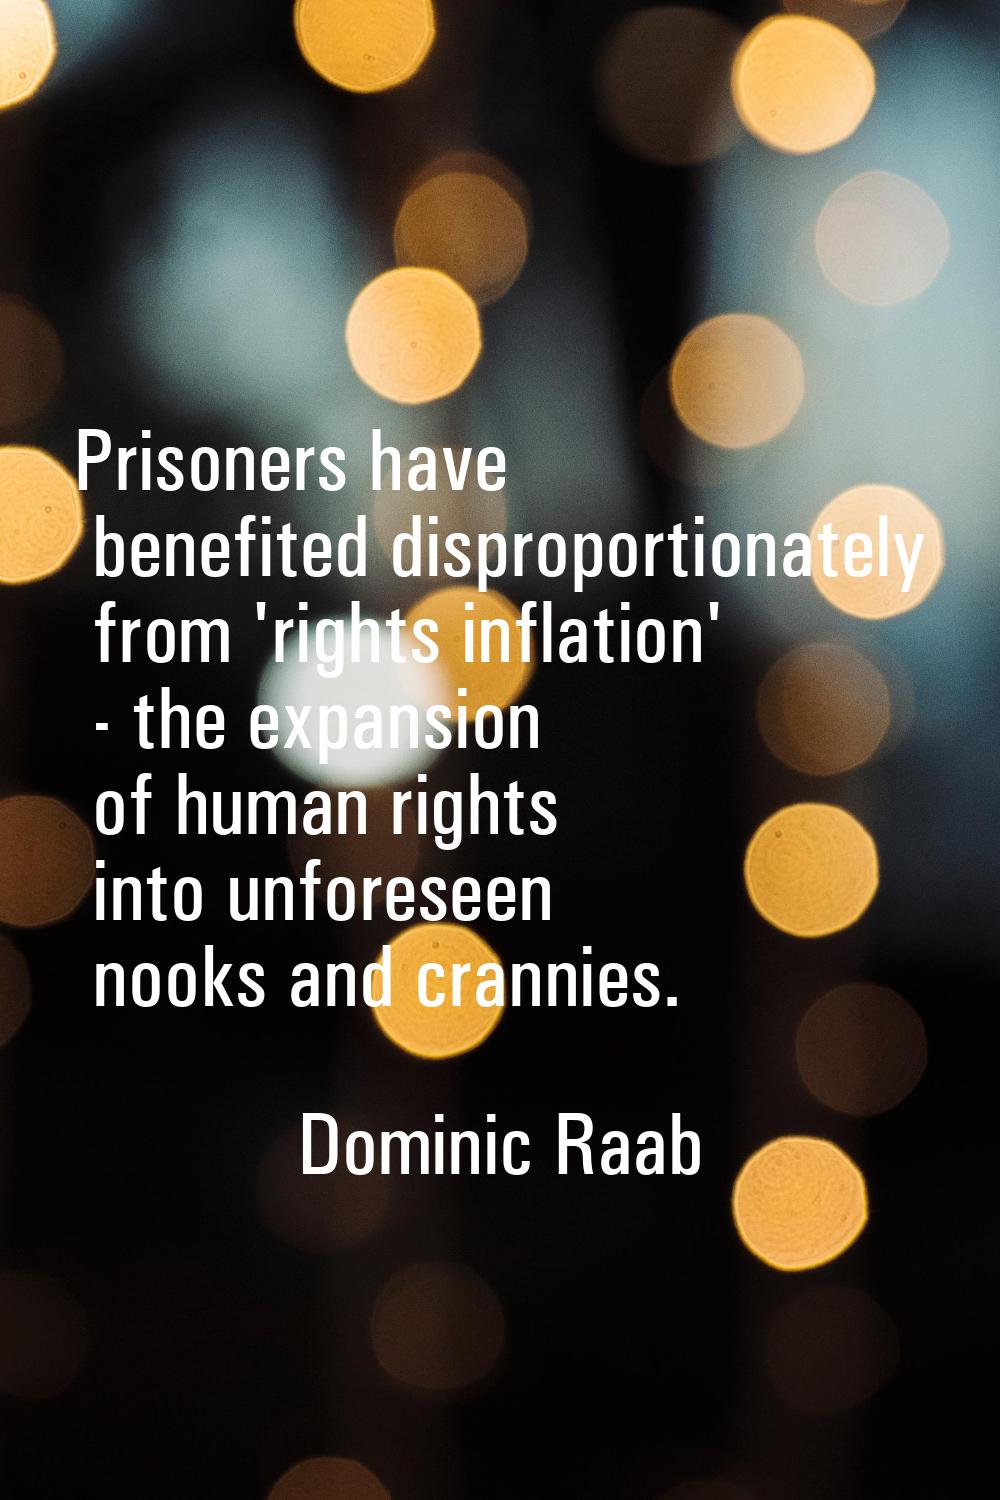 Prisoners have benefited disproportionately from 'rights inflation' - the expansion of human rights